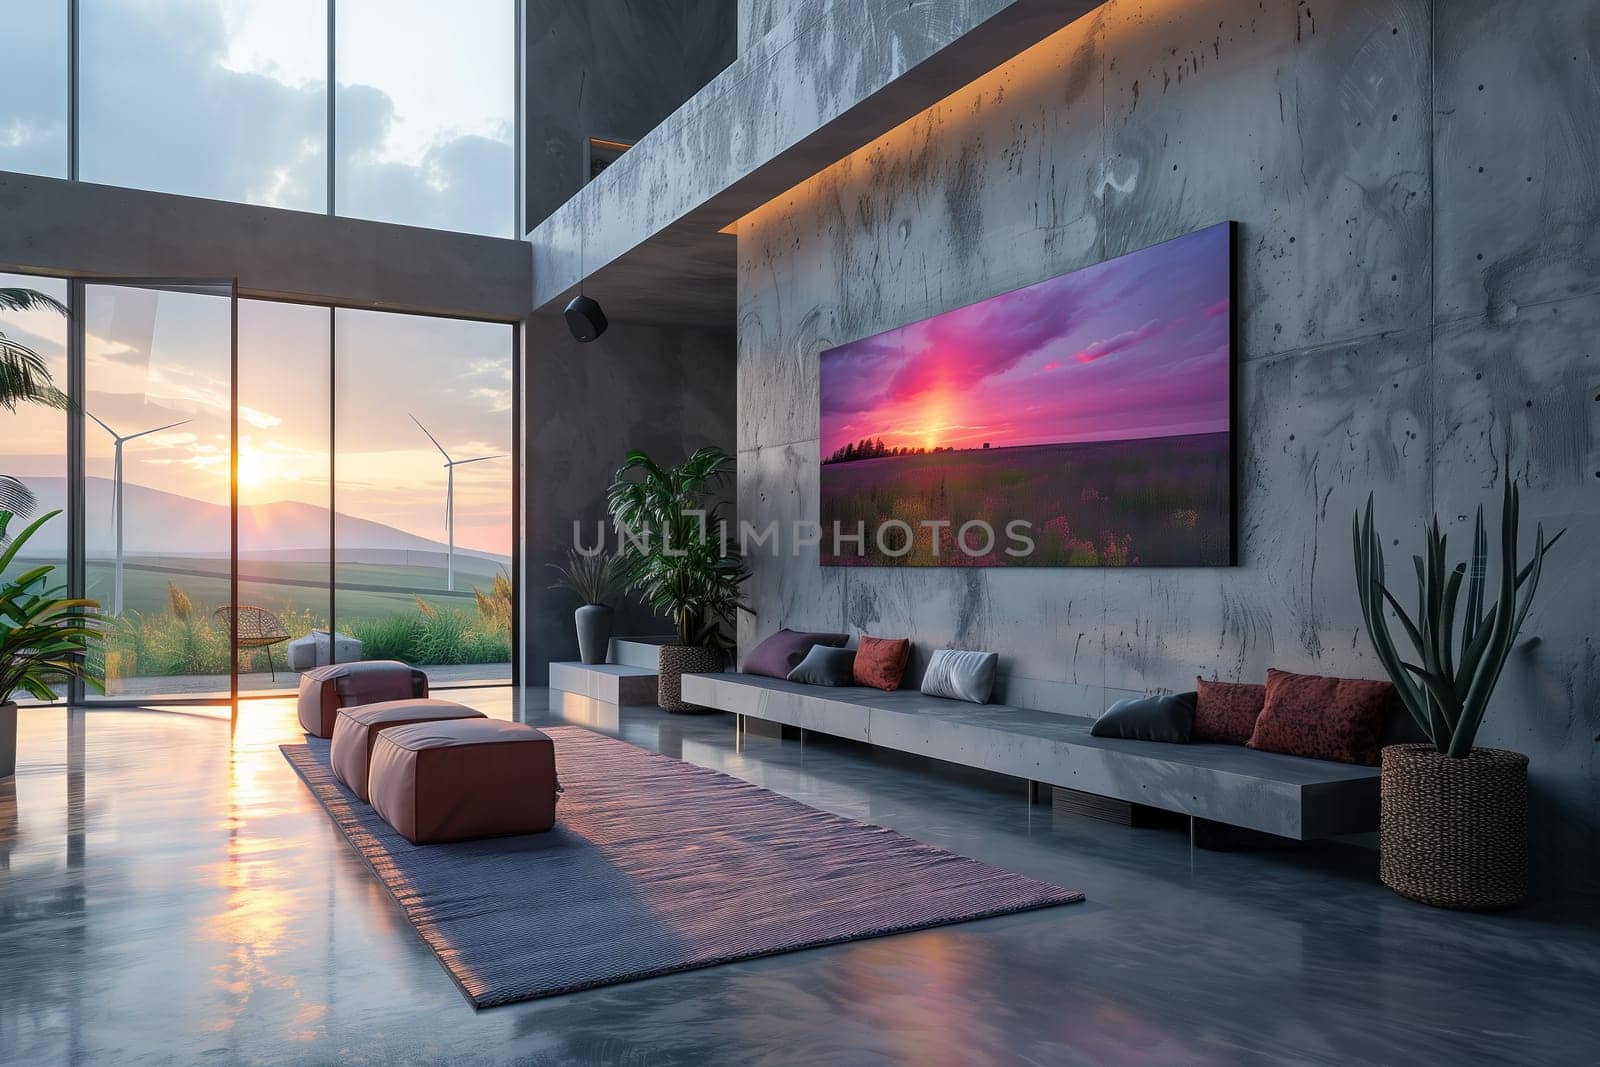 A cozy living room with a spacious flat screen TV mounted on the wall. The interior design features wood flooring and a houseplant adding a touch of nature to the space